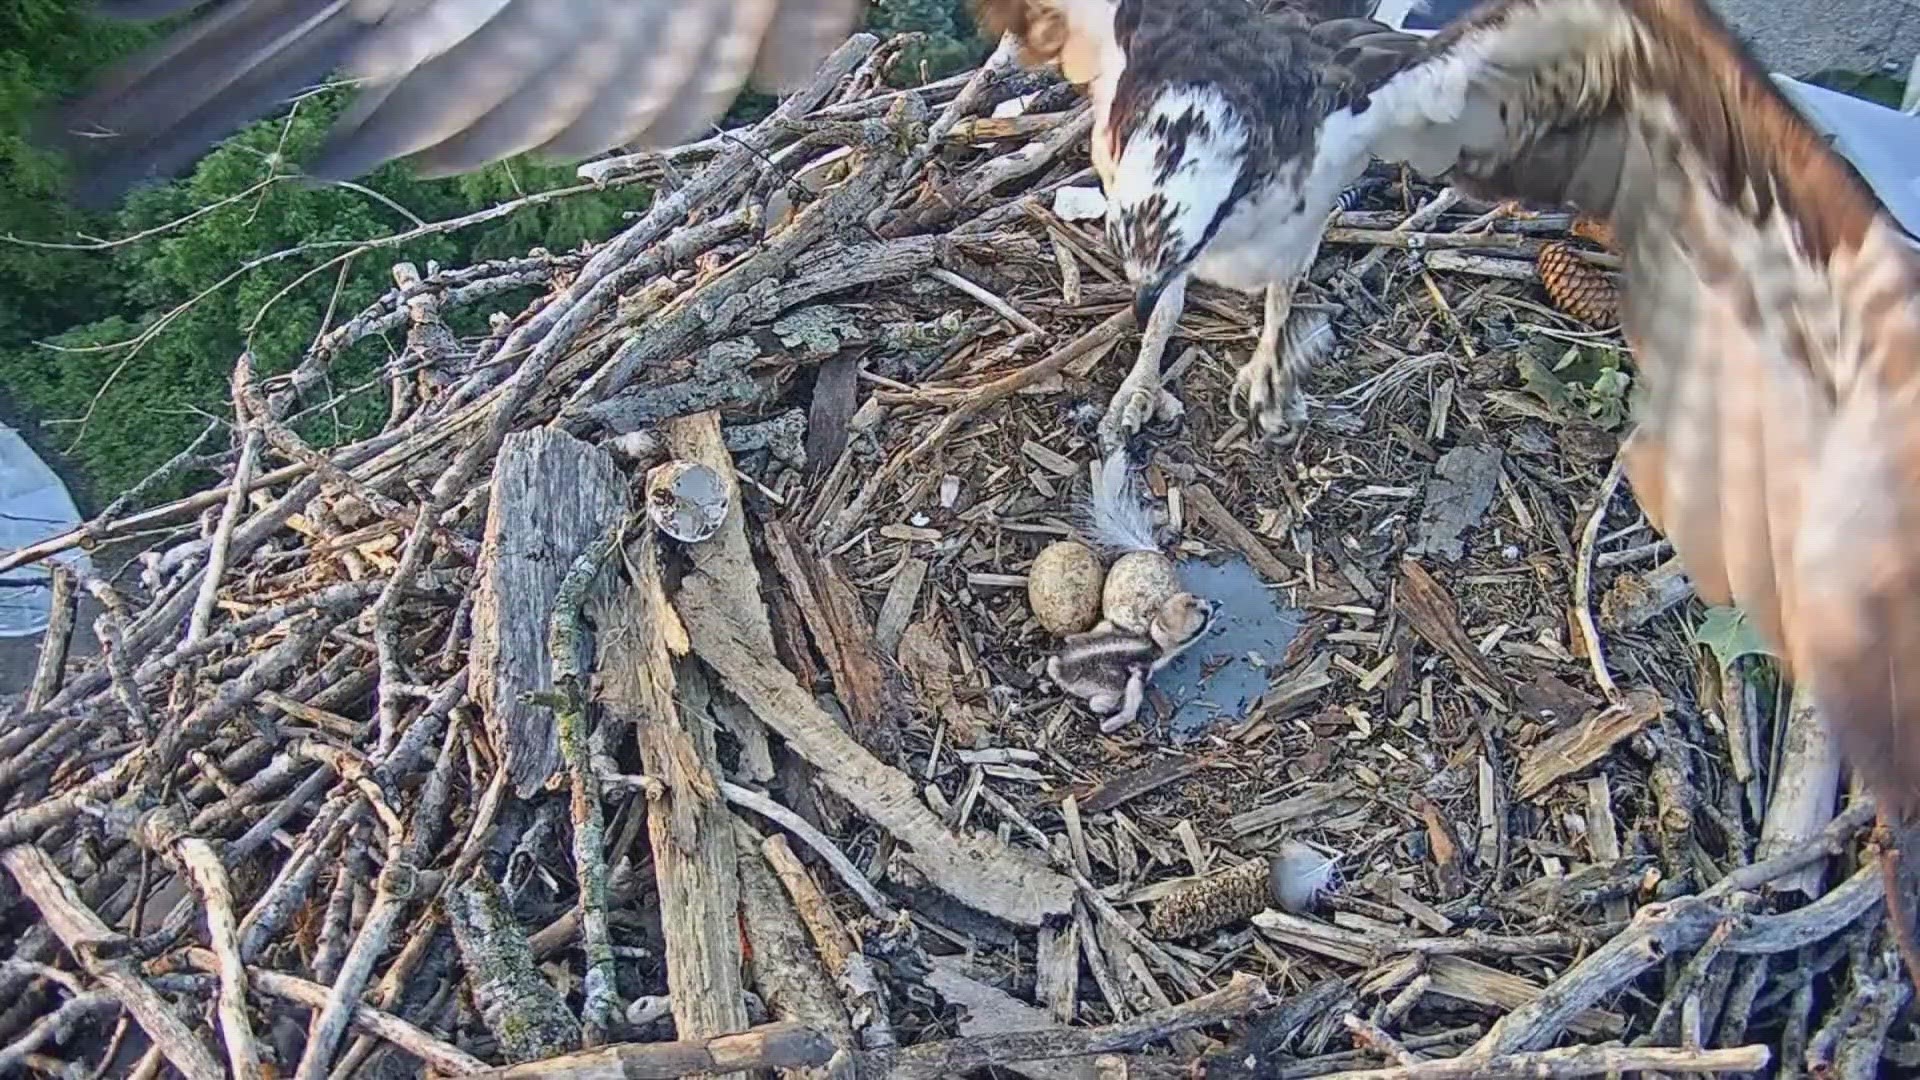 Our friends in South Bend are keeping an eye on a couple of ospreys that built a nest on the studio tower.